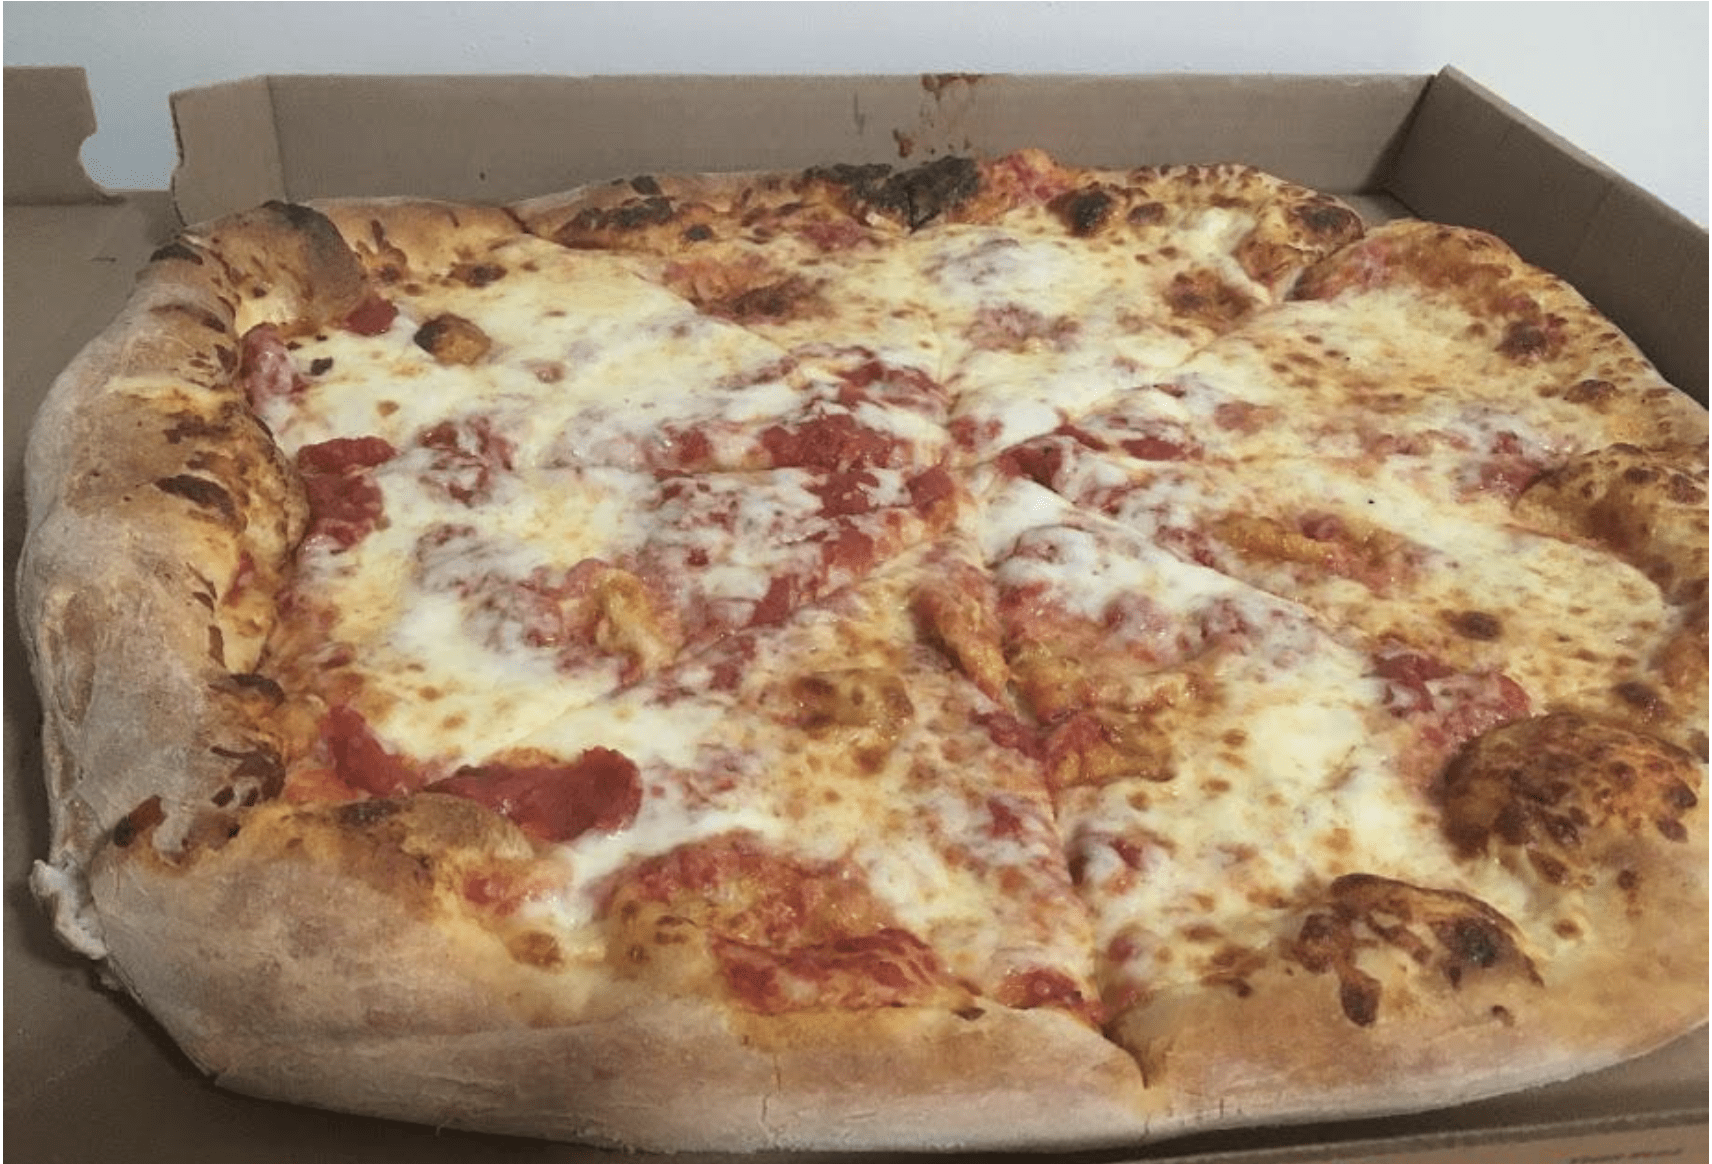 19-inch brick oven pizza made to order in 13 minutes at Market Basket locations in New England, only $8.99